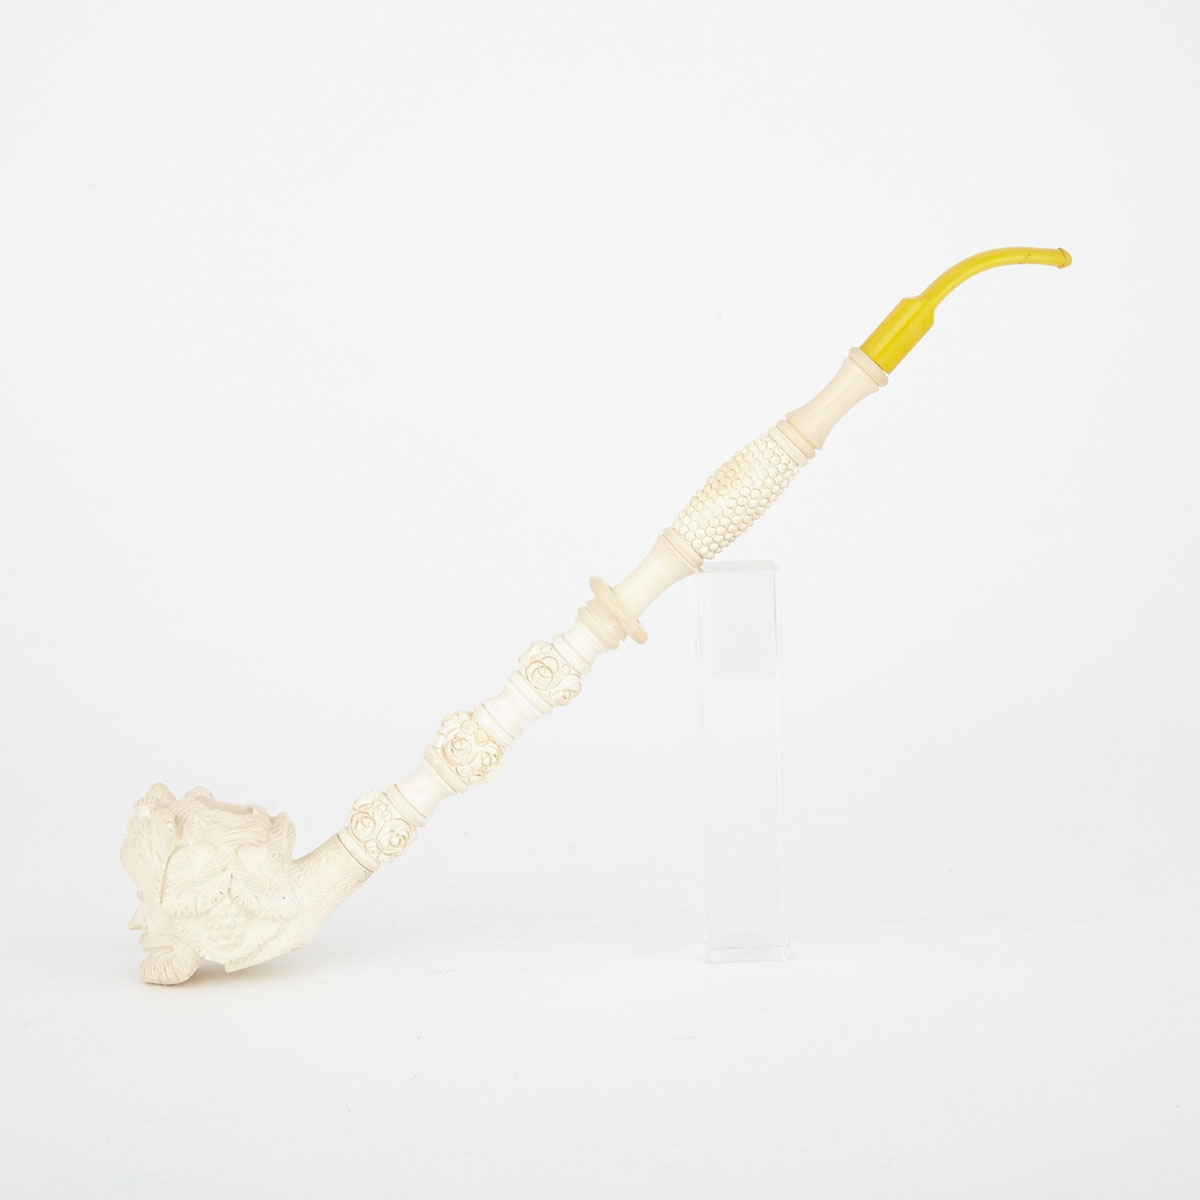 Large Austrian Carved and Turned Meerschaum Pipe, early-mid 20th century